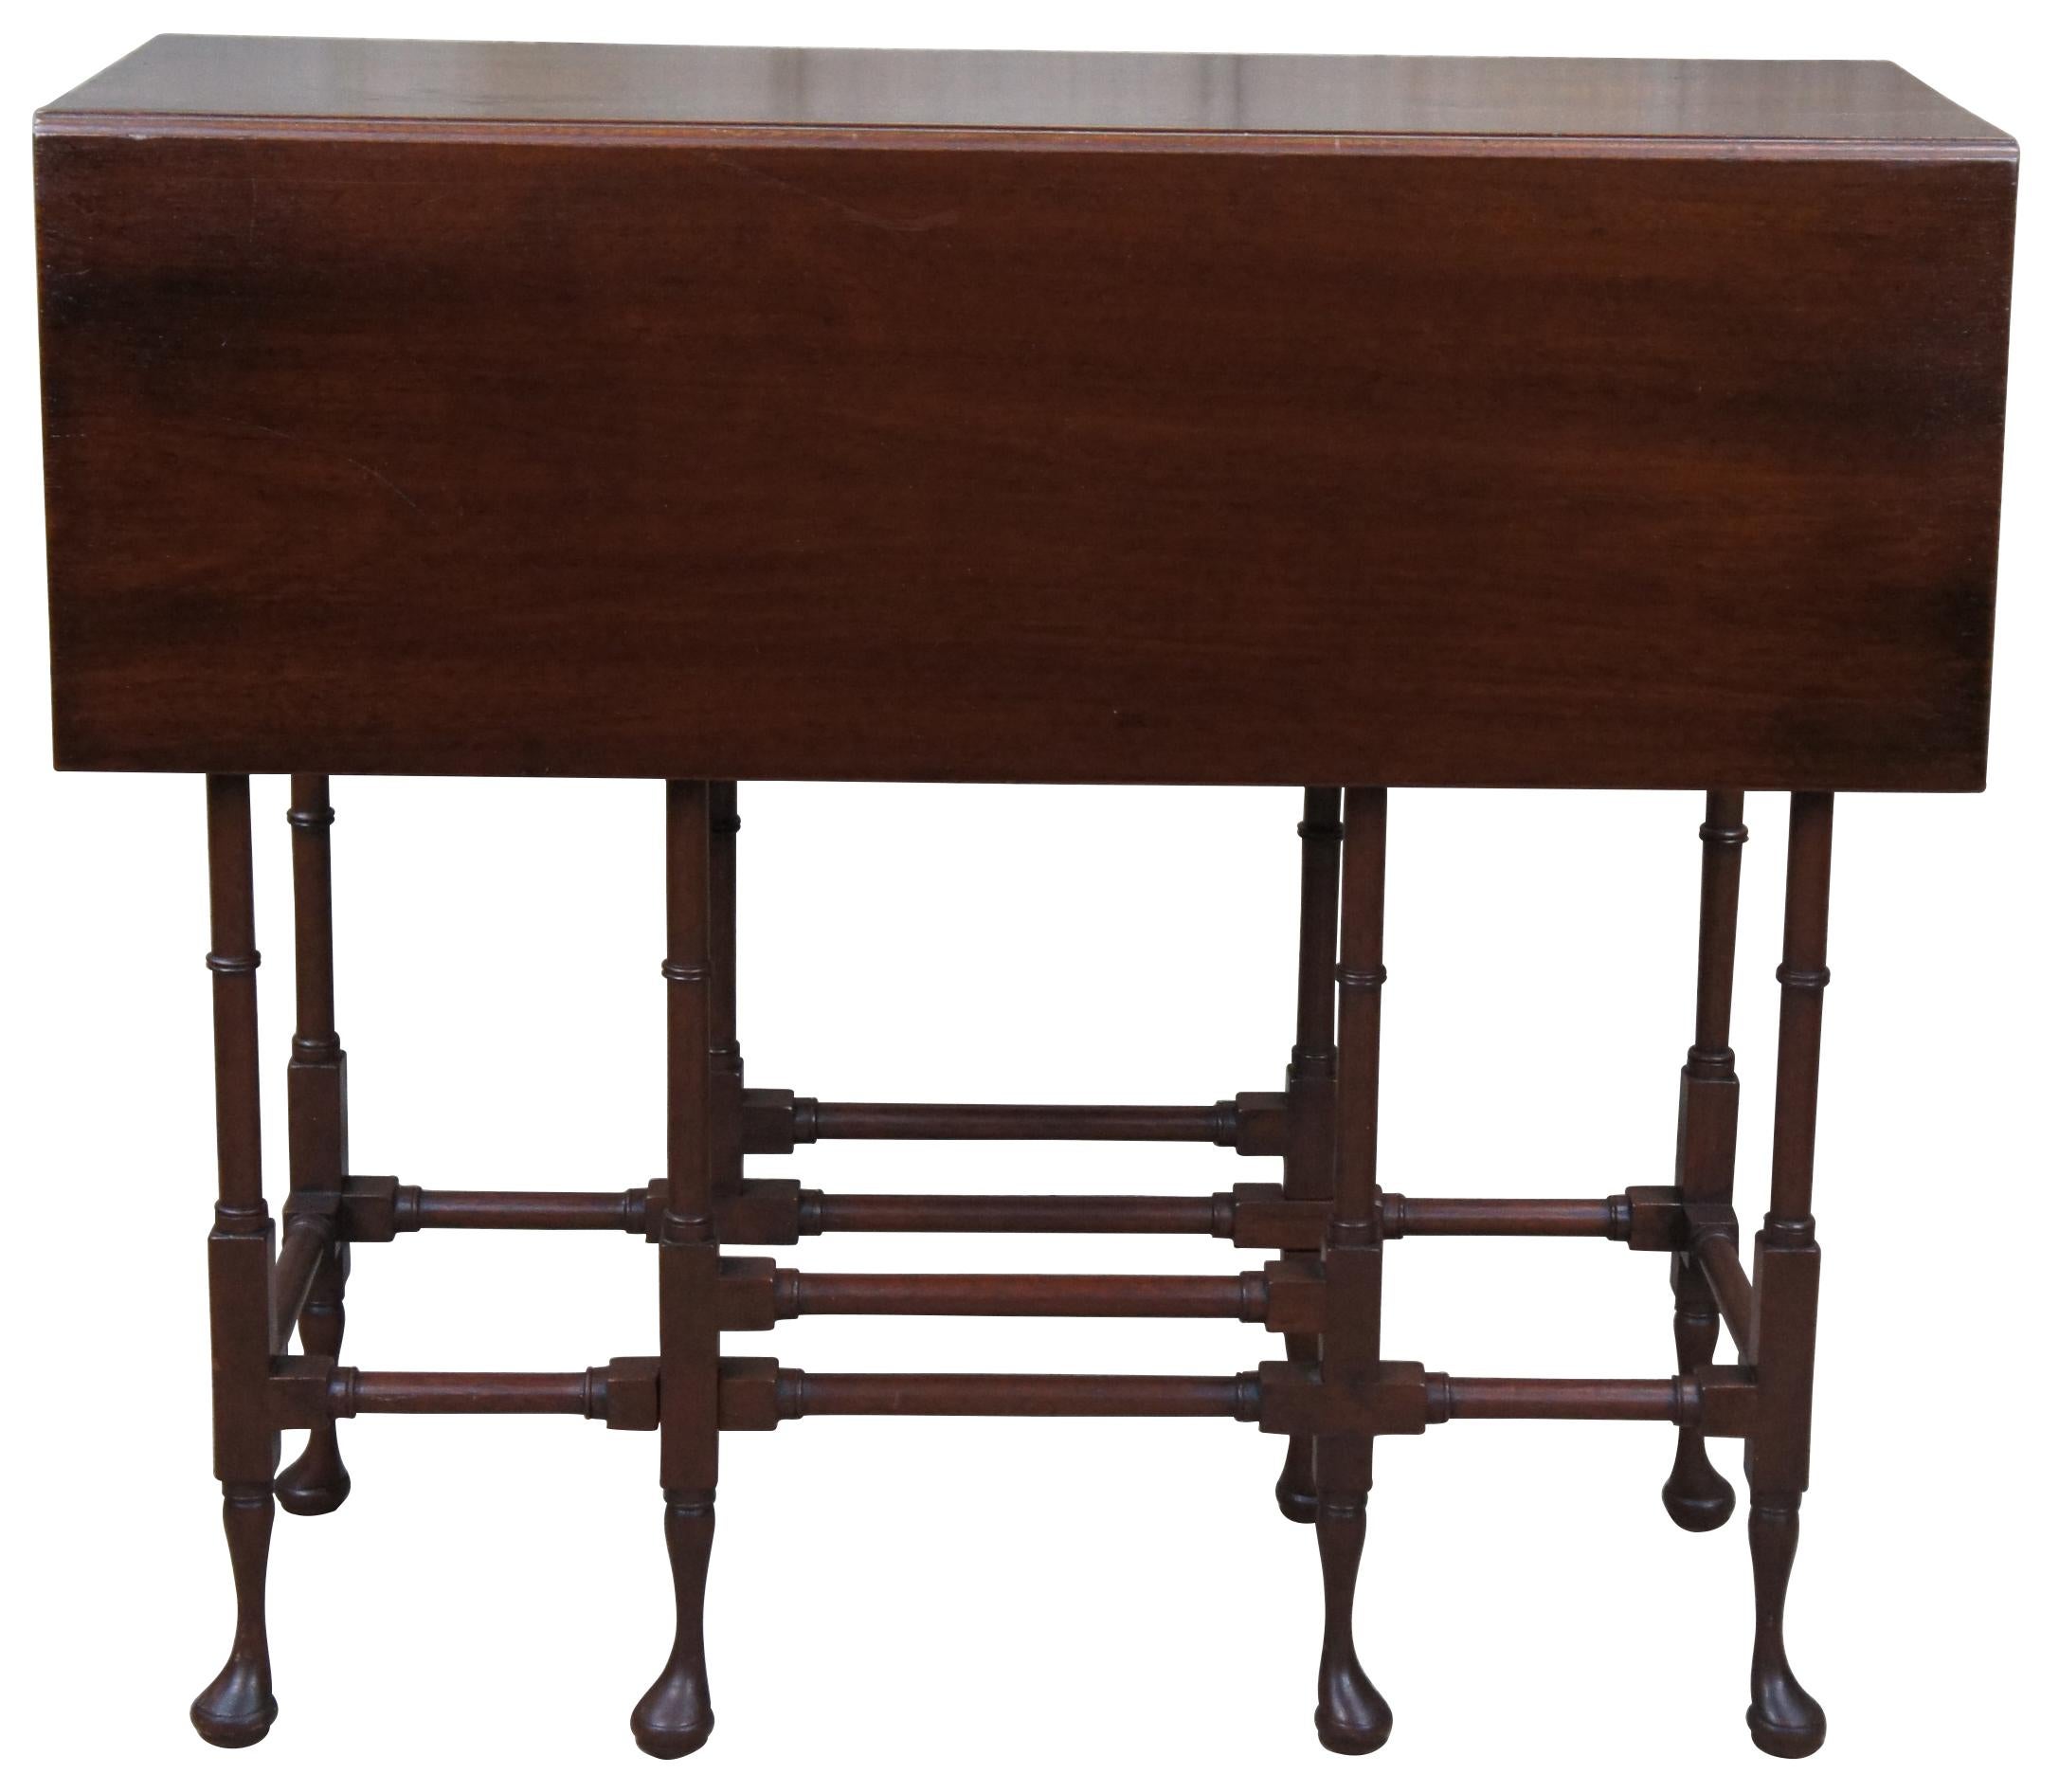 A classic and petite George III mahogany drop leaf side table from the legendary Chicago furniture maker, Quigley, circa 1940s. Features a long and slender form with central drawer, split drop leaf along one side and spider campaign style legs.